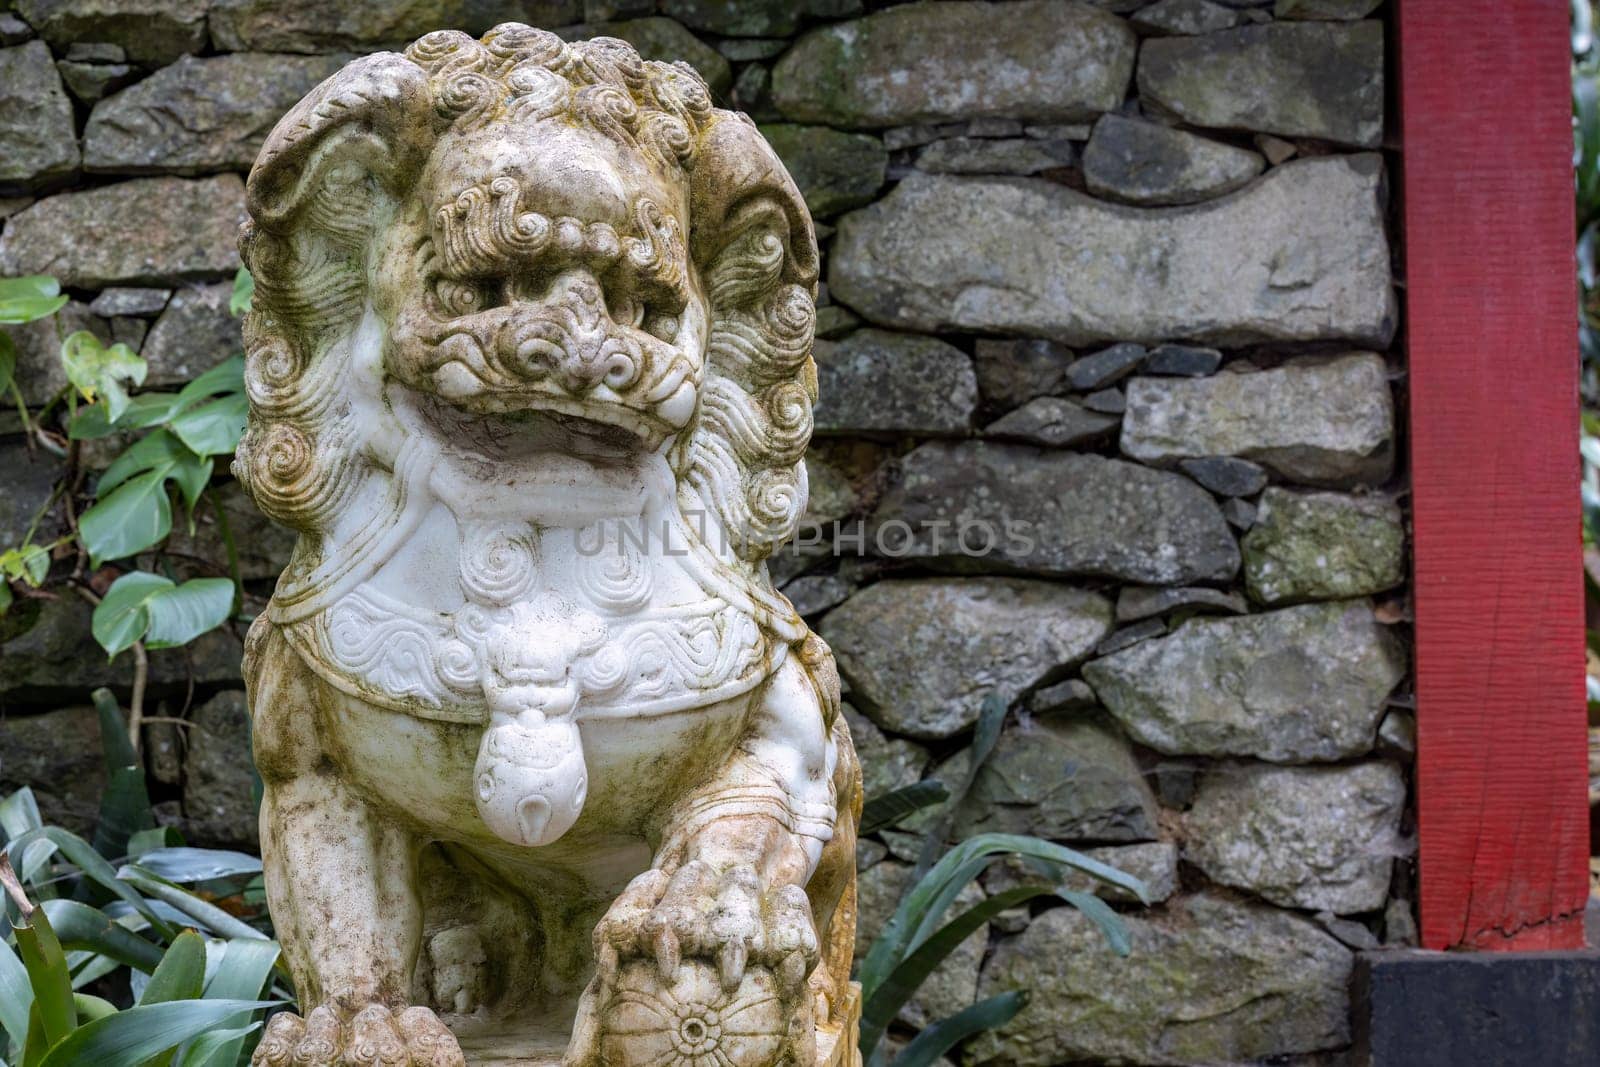 A lion statue in the Monte Palace Tropical Gardens, Monte (near Funchal), Madeira, Portugal